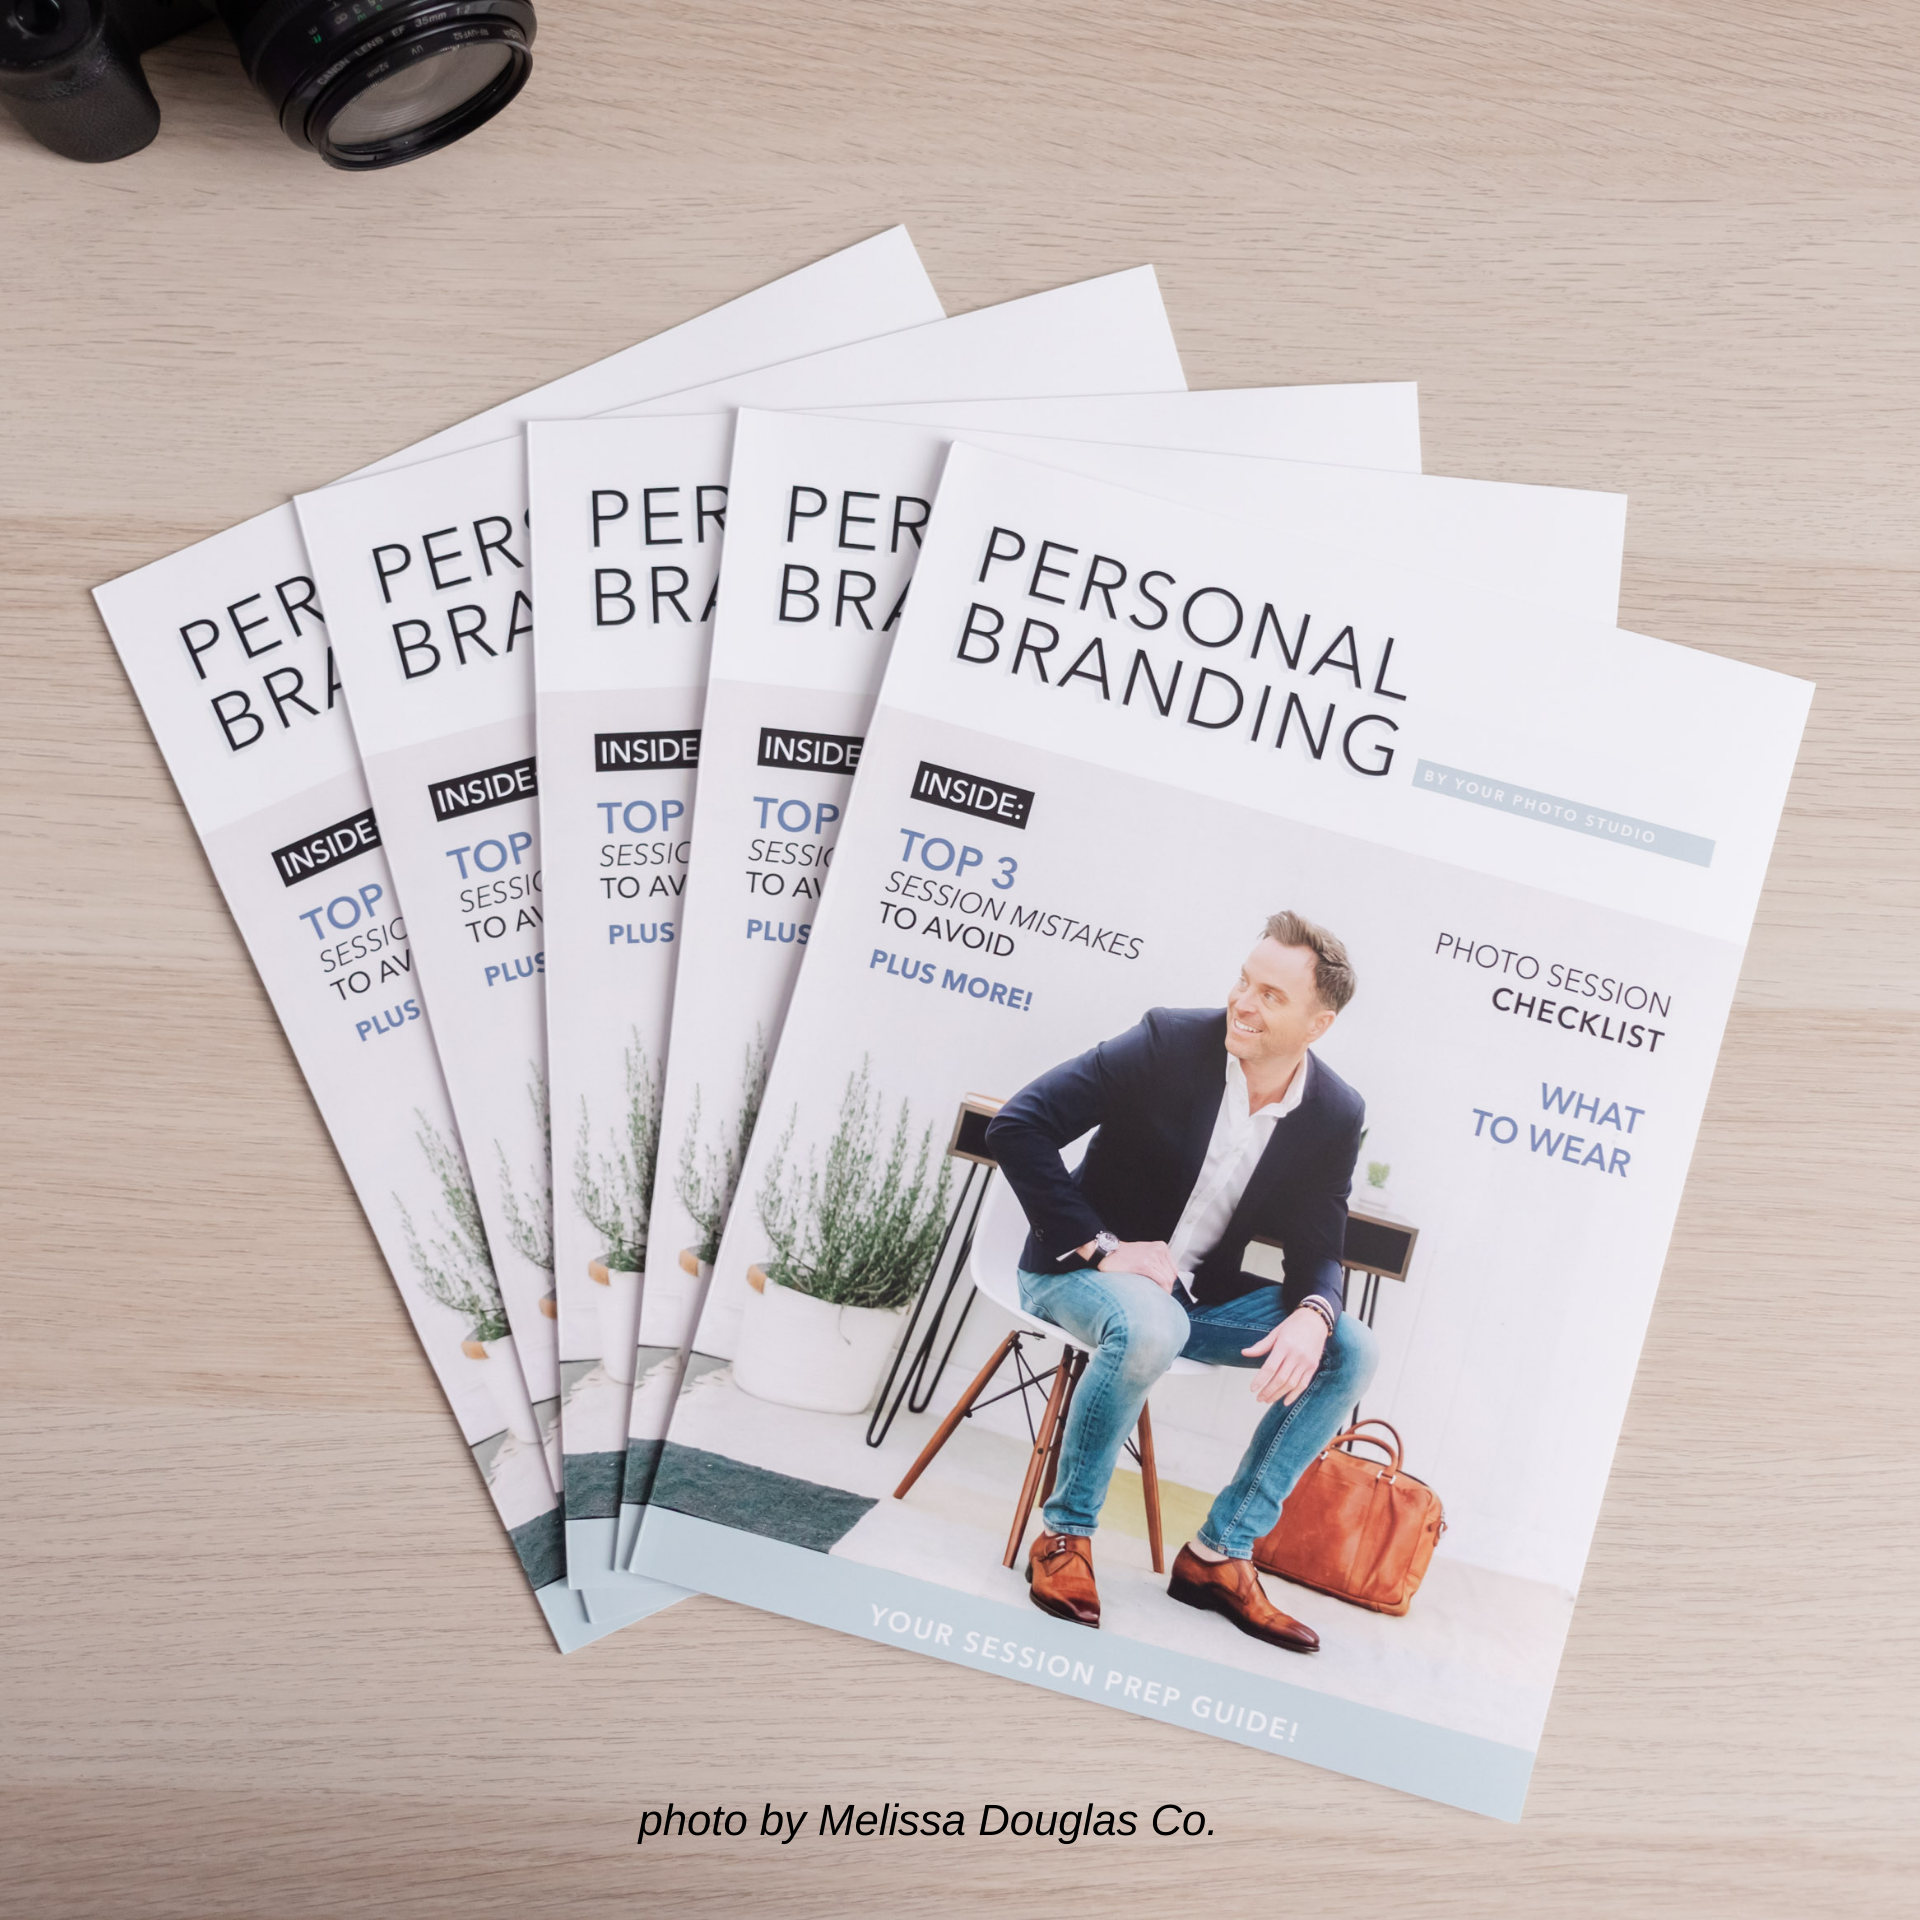 Personal Brand Photography Marketing